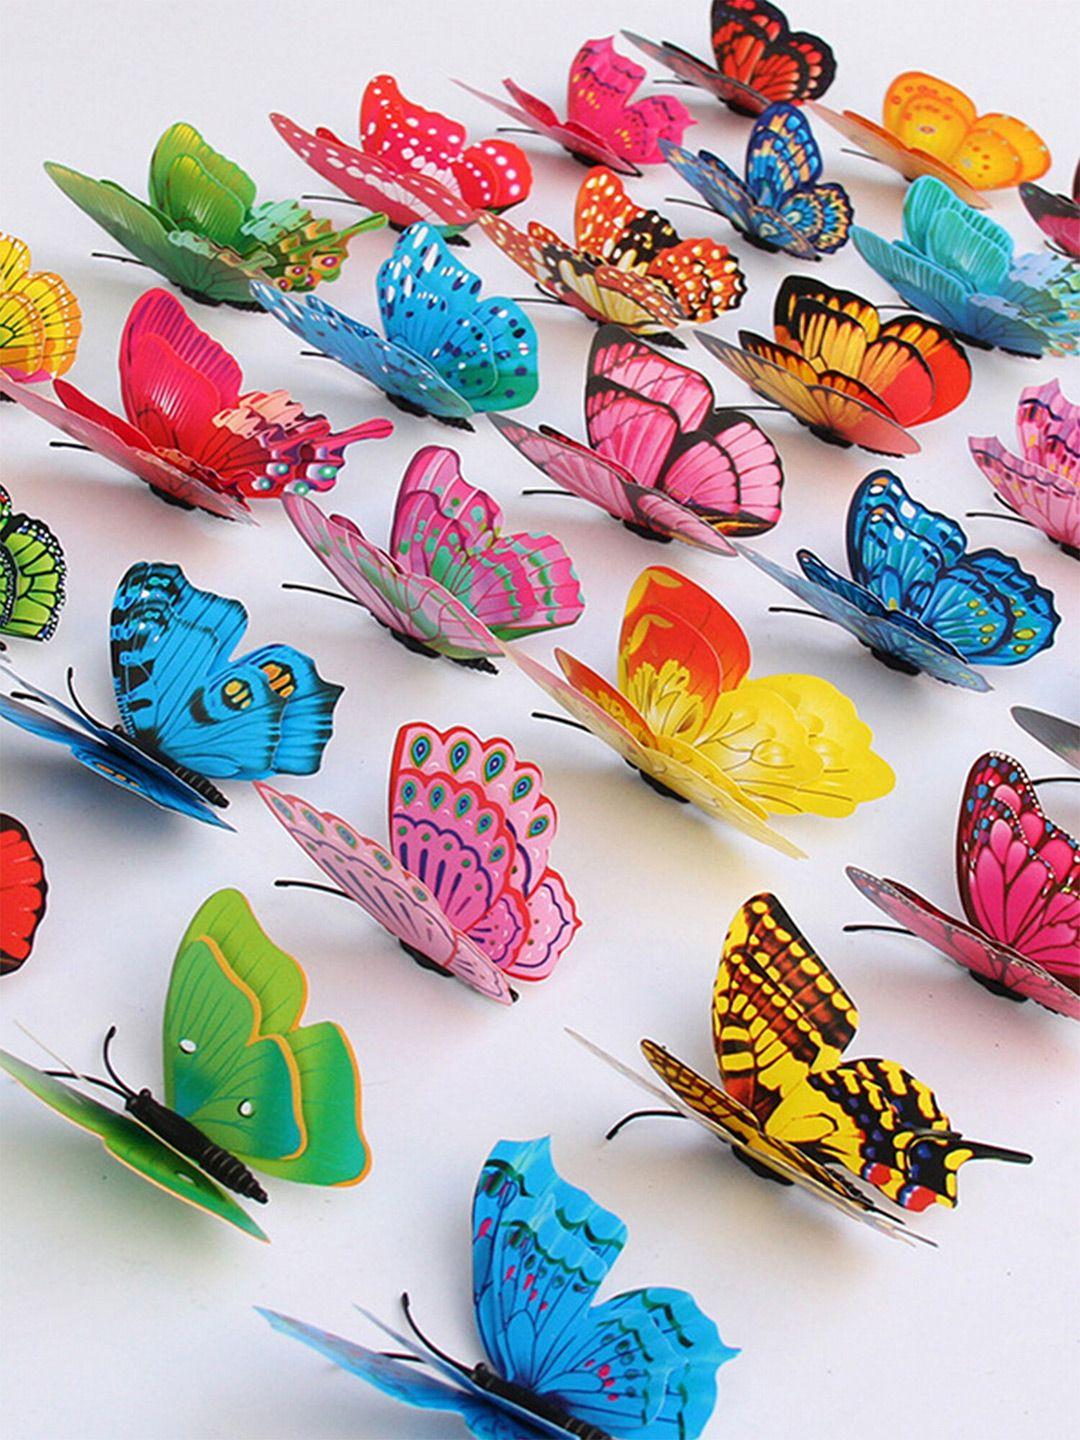 yellow-chimes-girls-pack-of-12-butterfly-hair-accessory-set